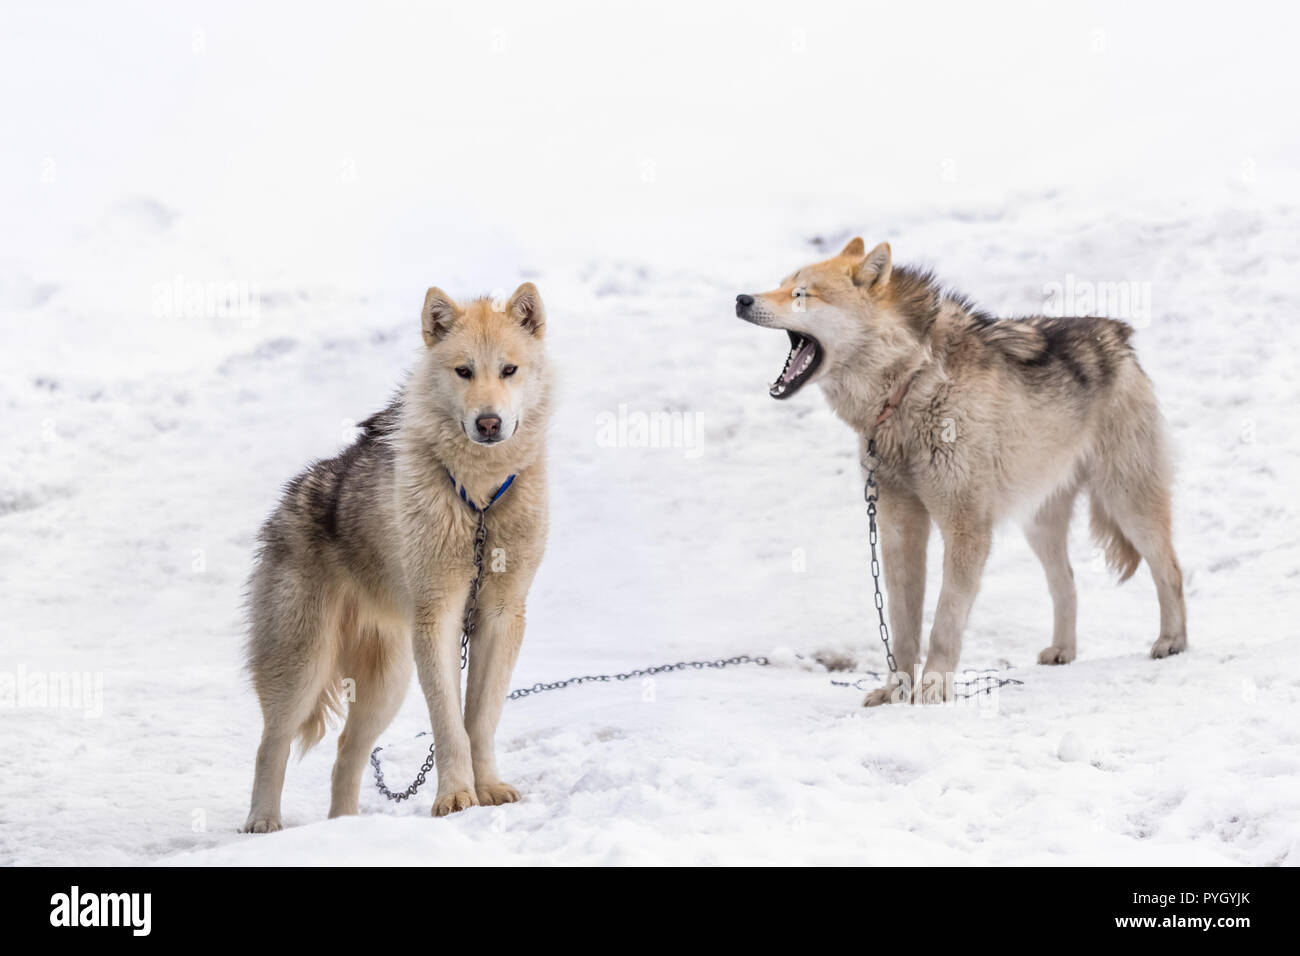 Two greenlandic Inuit sledding dogs standing on alert in the snow, Sisimiut, Greenland Stock Photo